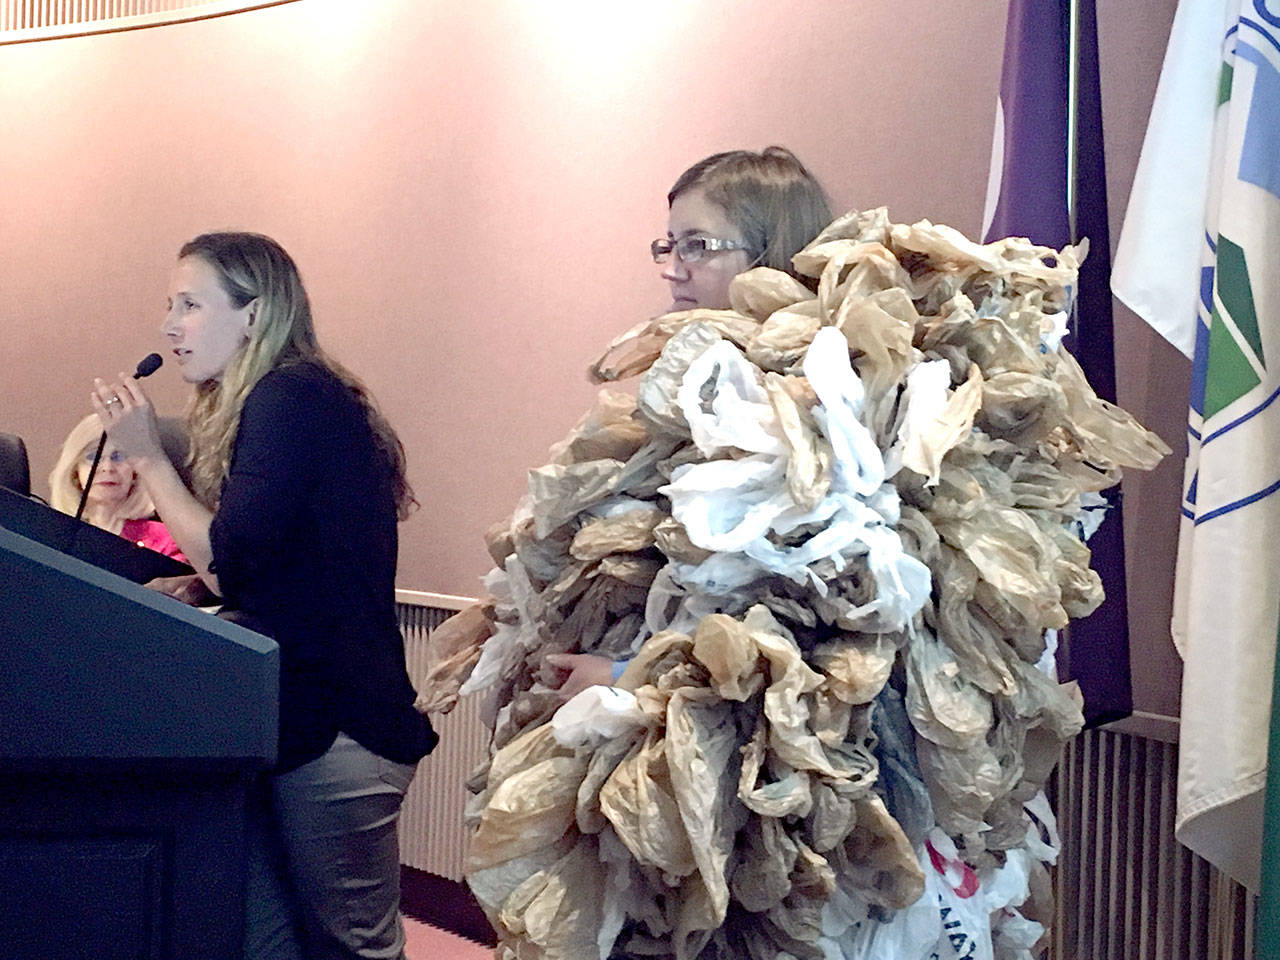 Melinda Gelder of the Port Angeles Plastic Reduction Coalition speaks to the Port Angeles City Council on Tuesday as Kim Sager-Fradkin looks on. Sager-Fradkin was wearing a costume of 500 plastic bags to represent the number of plastic bags that the average American throws away every year. (Rob Ollikainen/Peninsula Daily News)